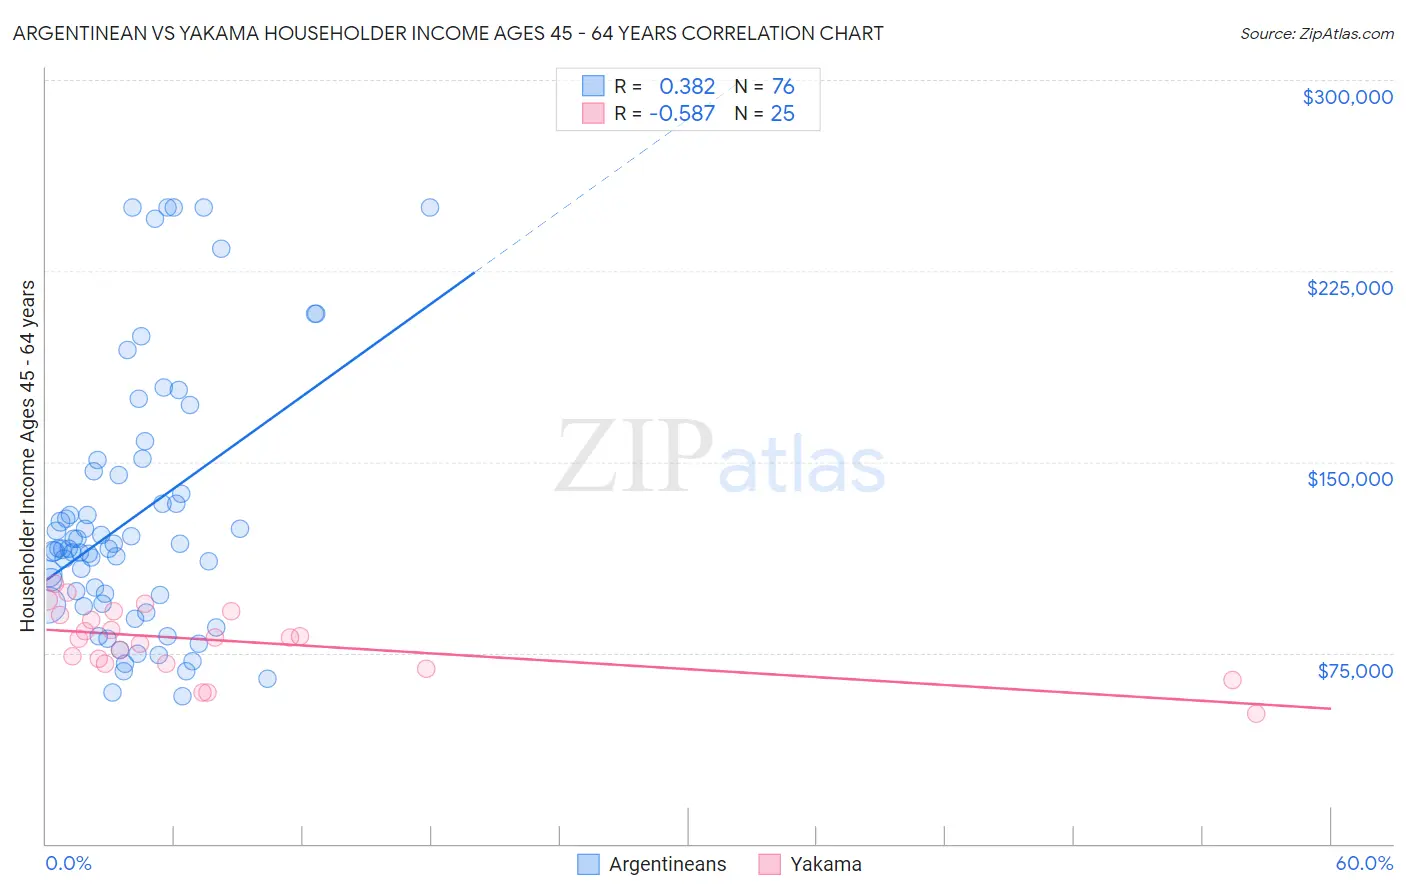 Argentinean vs Yakama Householder Income Ages 45 - 64 years